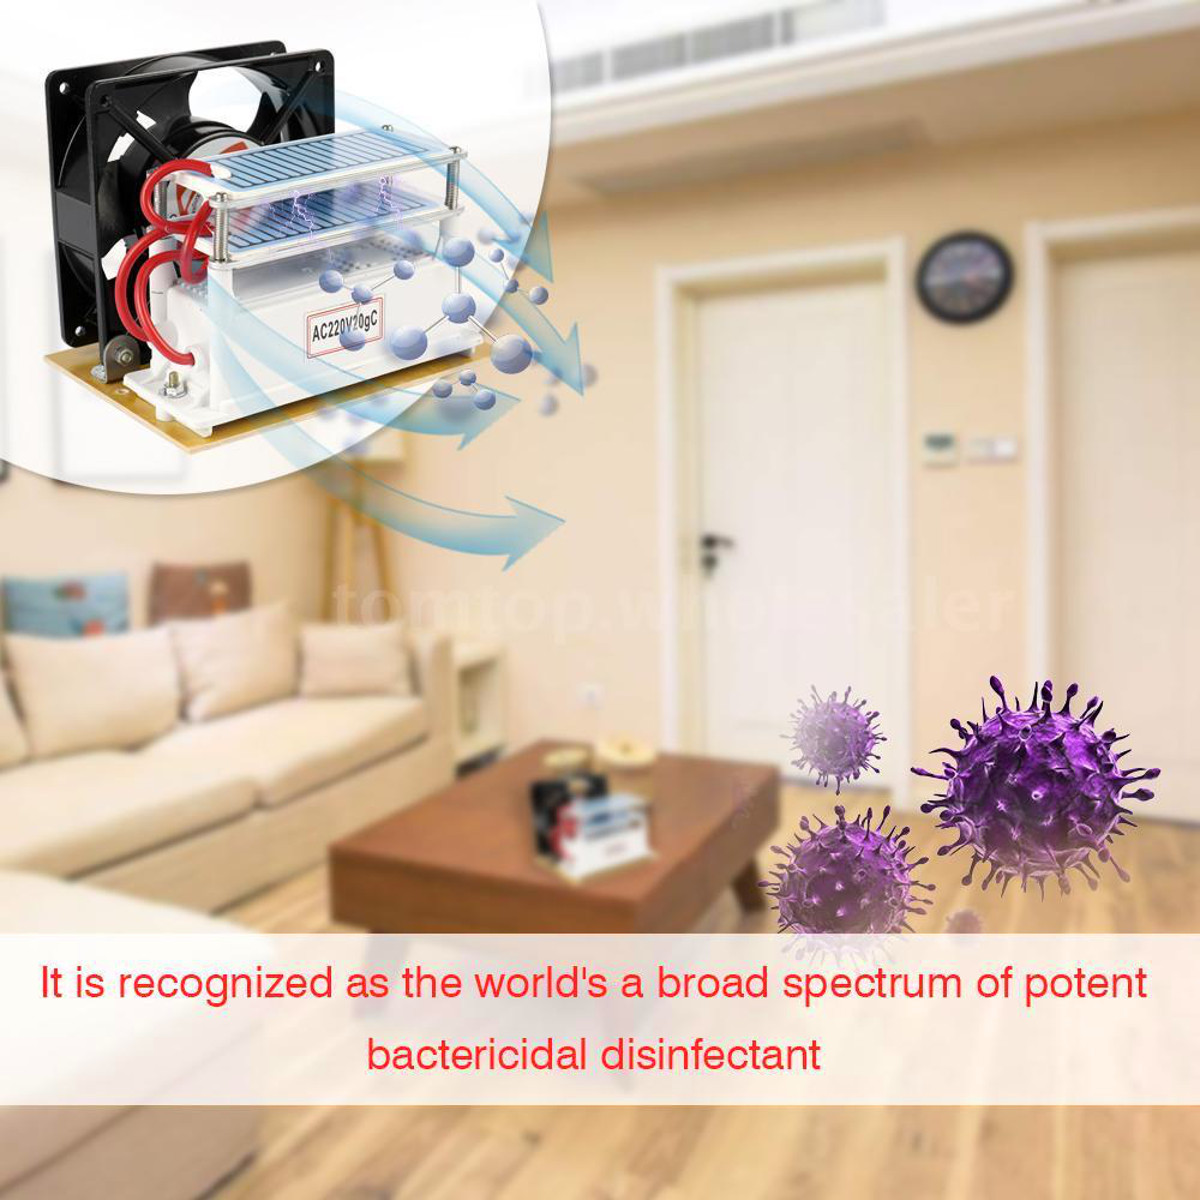 110V/220V 12/18/24g/h Ozone Generator Chip Active Oxygen Disinfection Machine Air Purifier